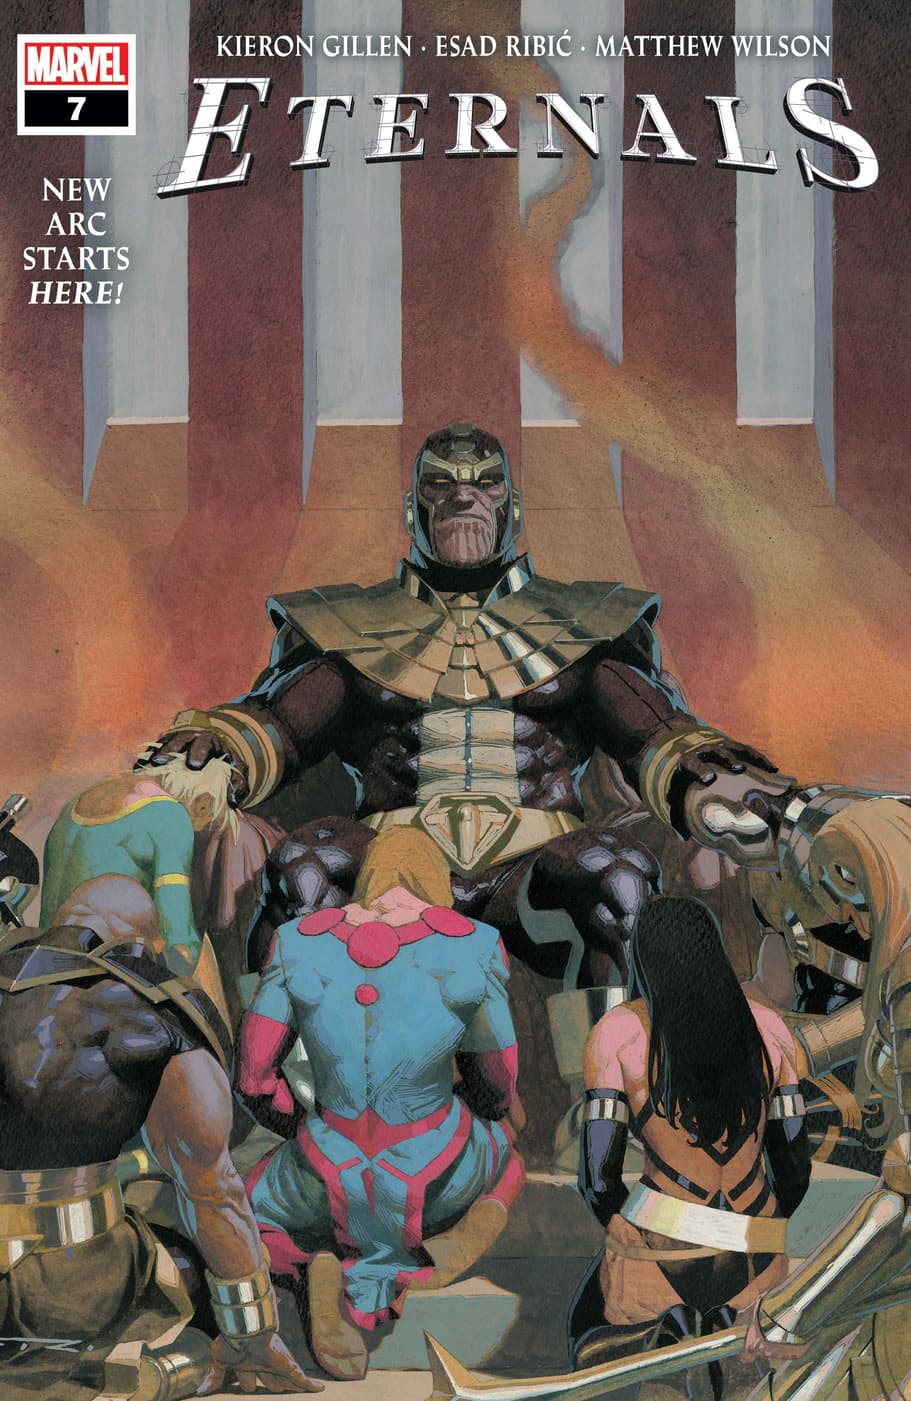 ETERNALS #7 cover by Esad Ribic and Matthew Wilson